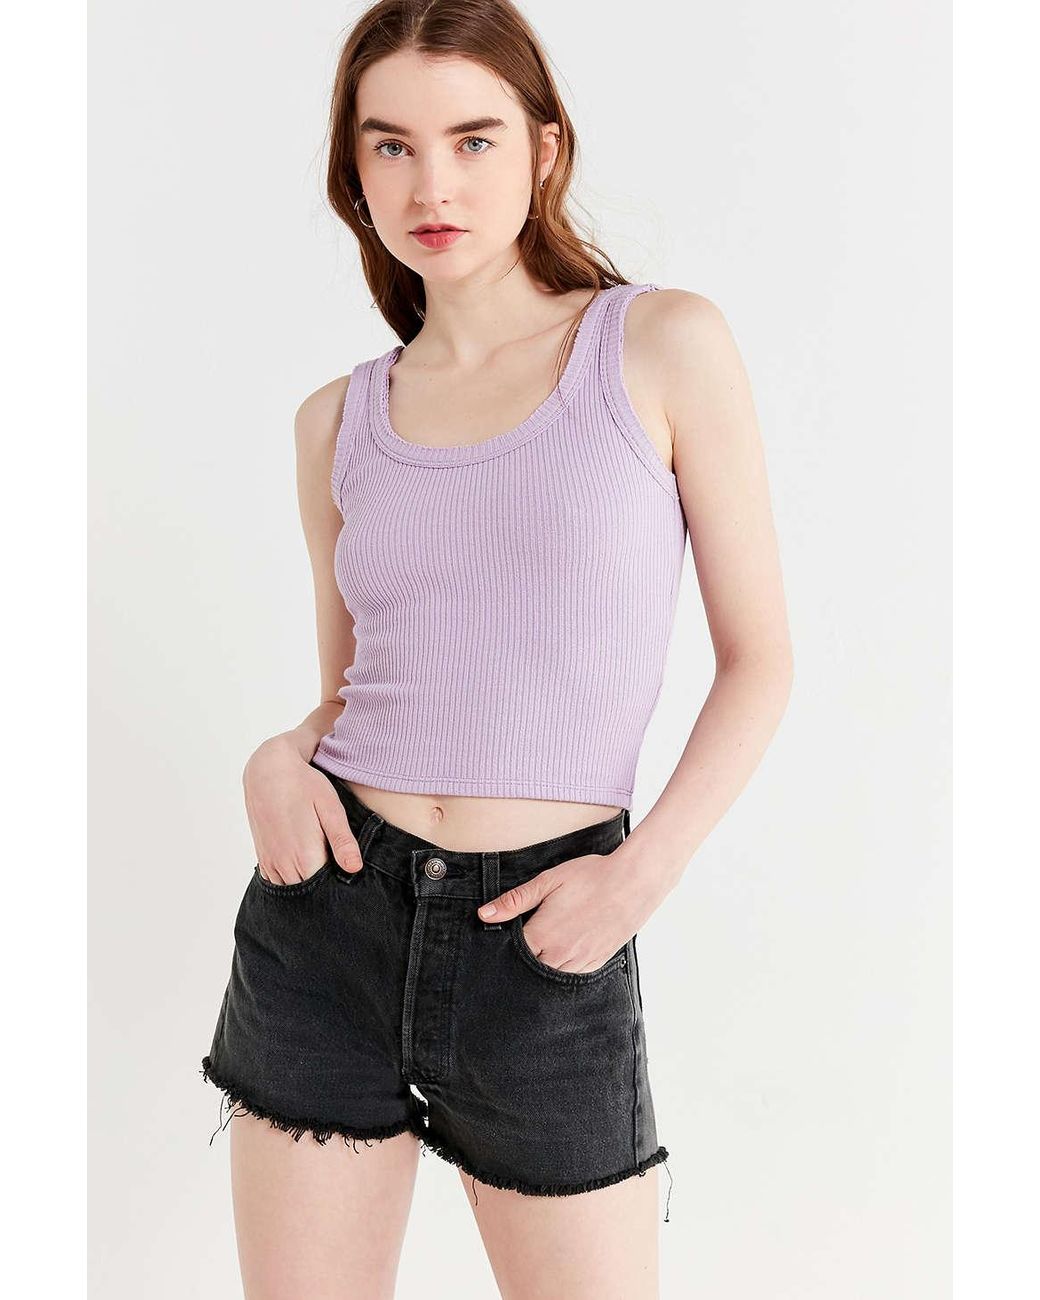 Urban Outfitters Cotton Uo Ribbed Knit Crop Tank Top in Purple | Lyst